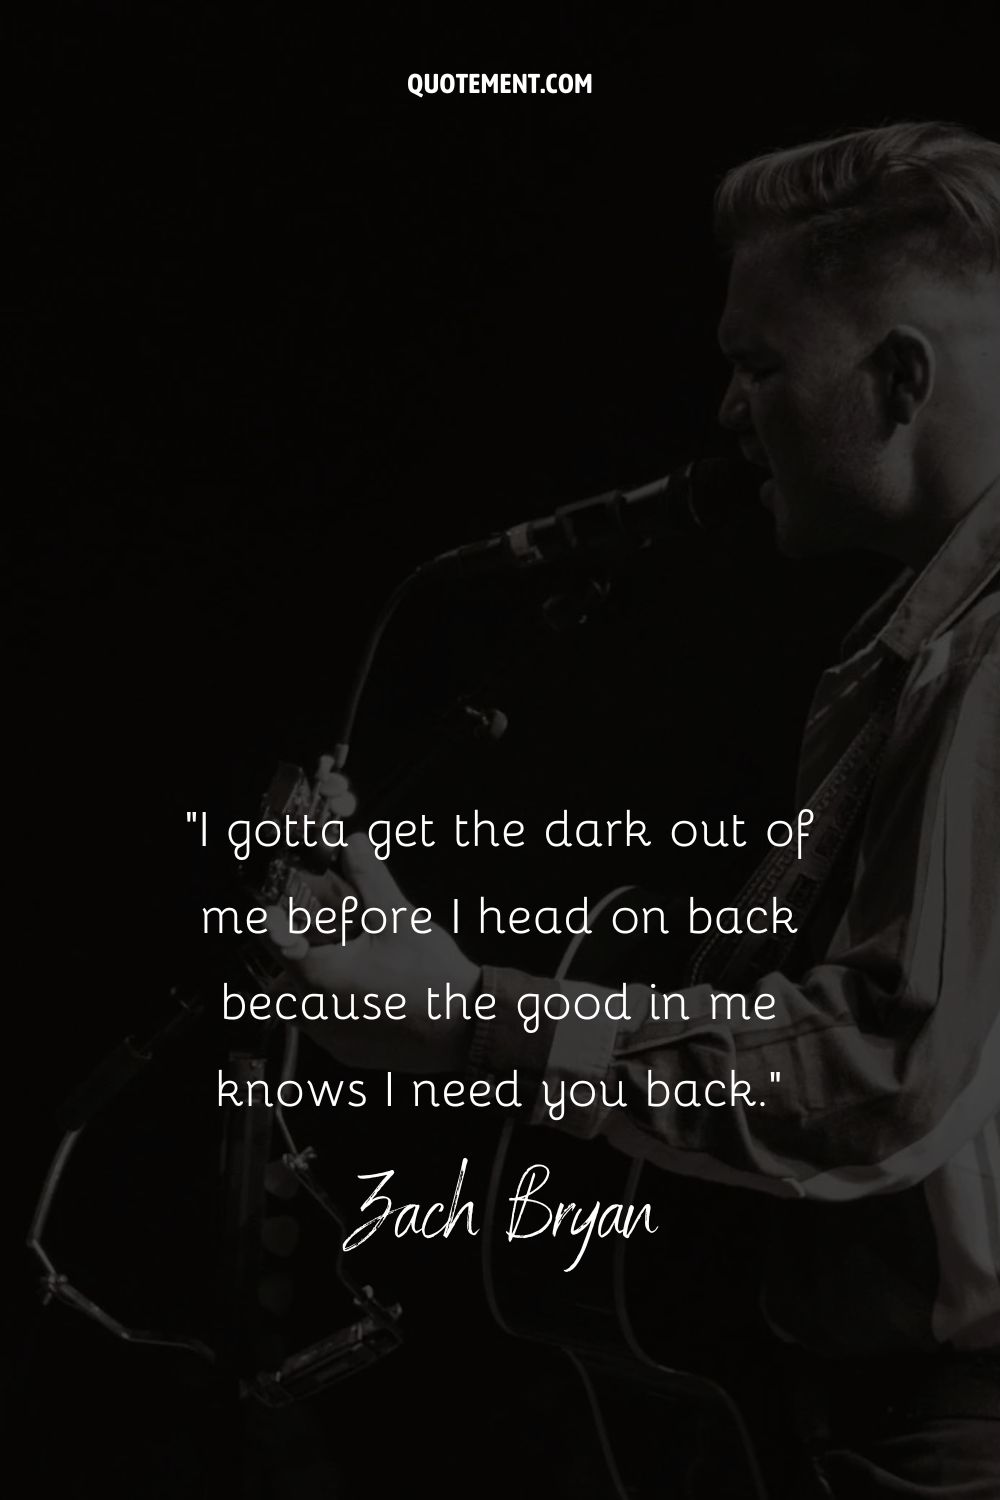 Zach Bryan's dynamic presence shines with guitar and mic